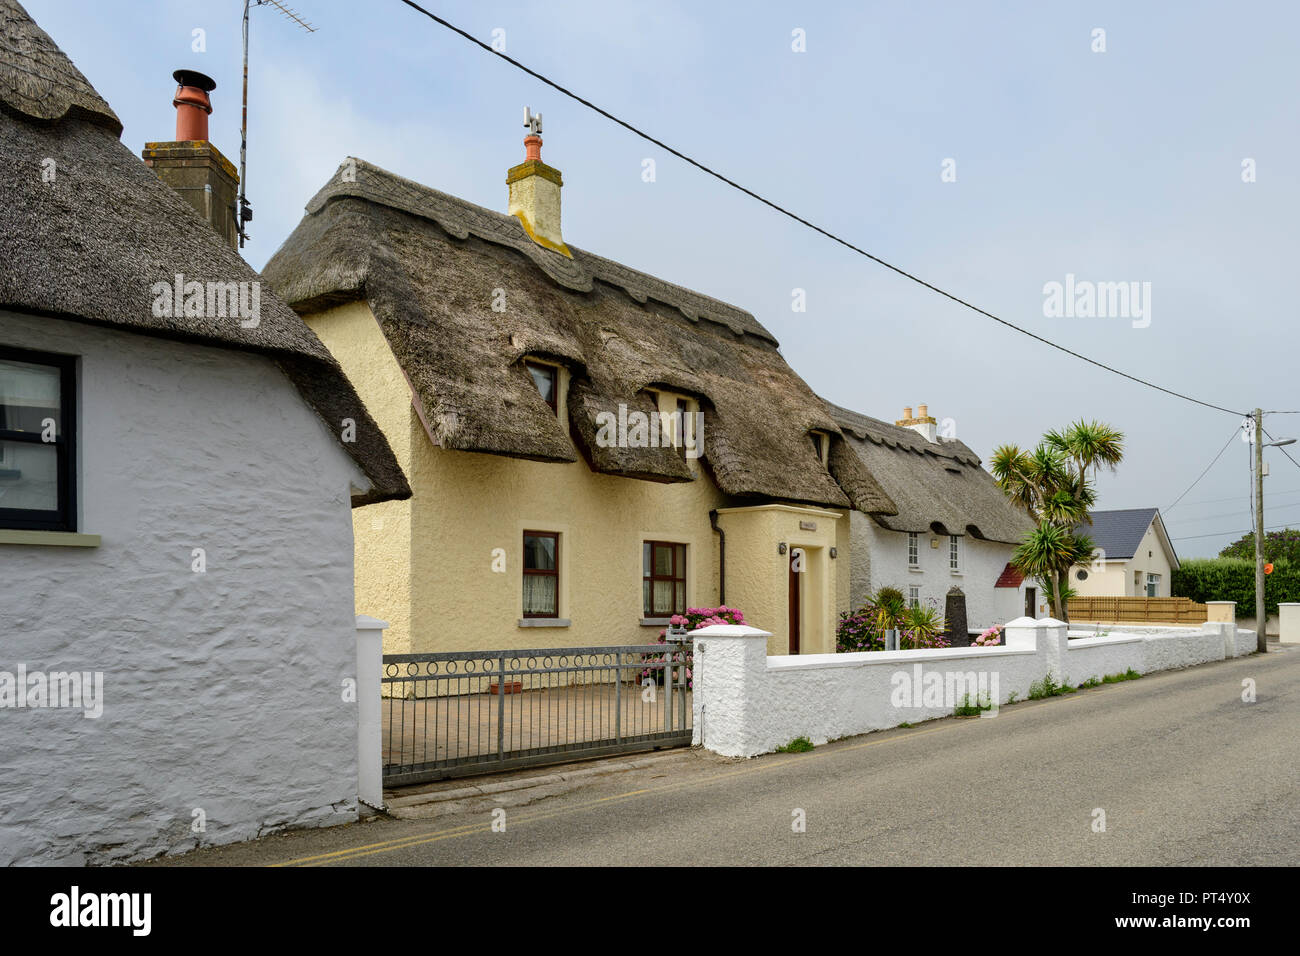 Reetgedeckte Cottages in Kilmore Quay, Co Wexford, Irland Stockfoto